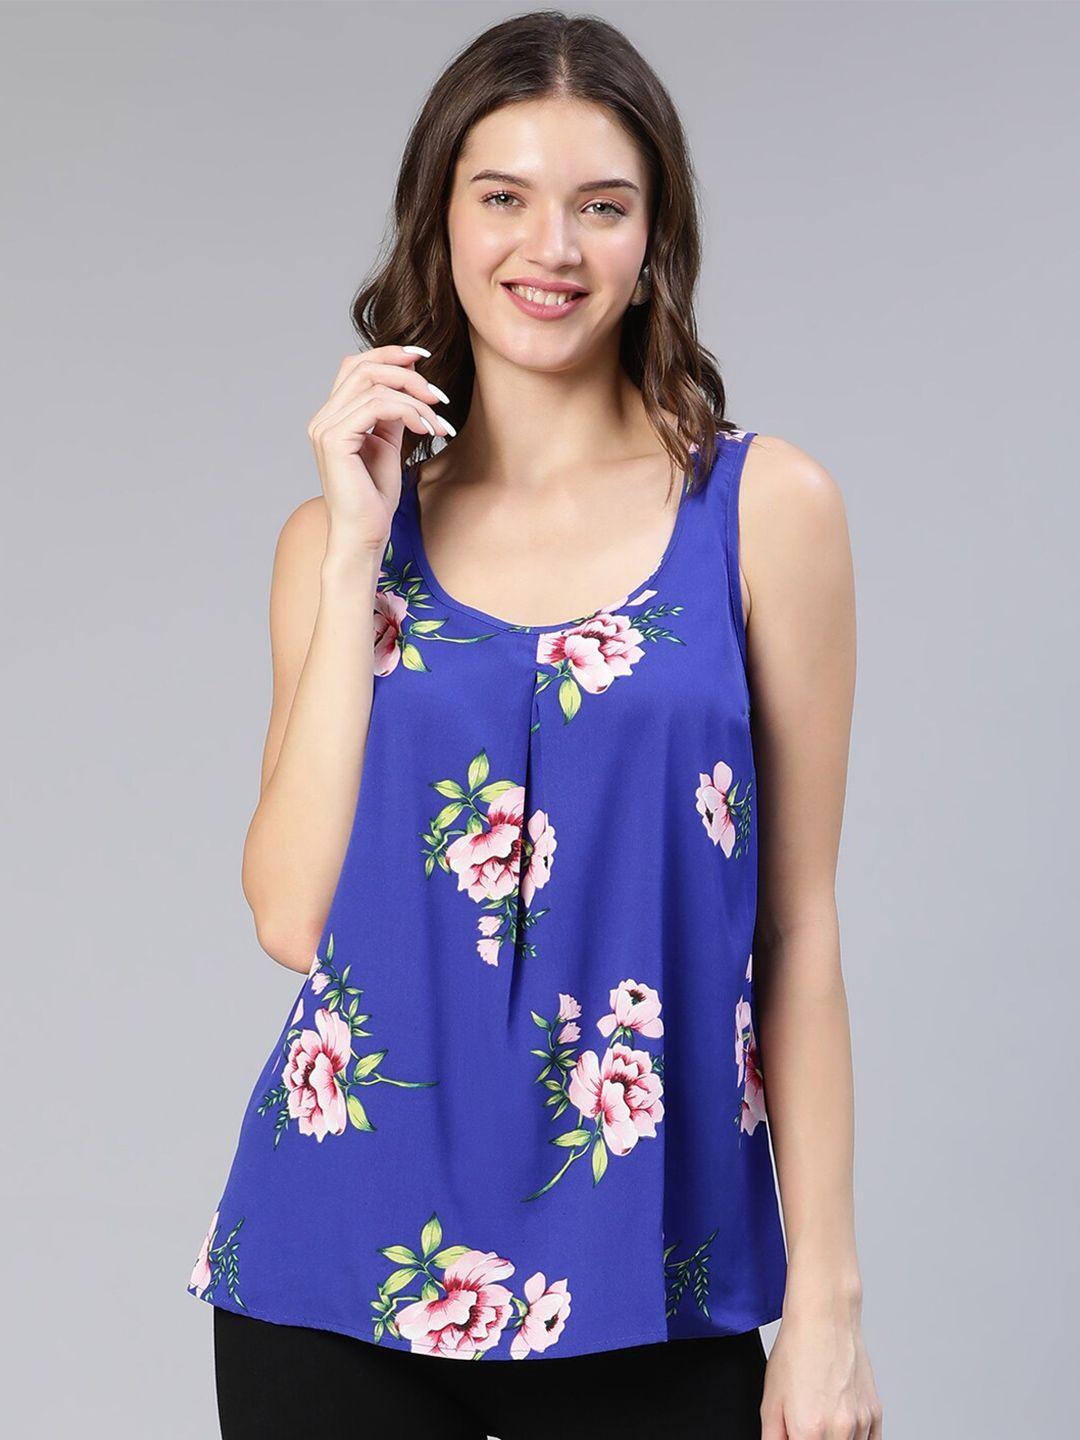 oxolloxo floral print sleeveless scoop neck top